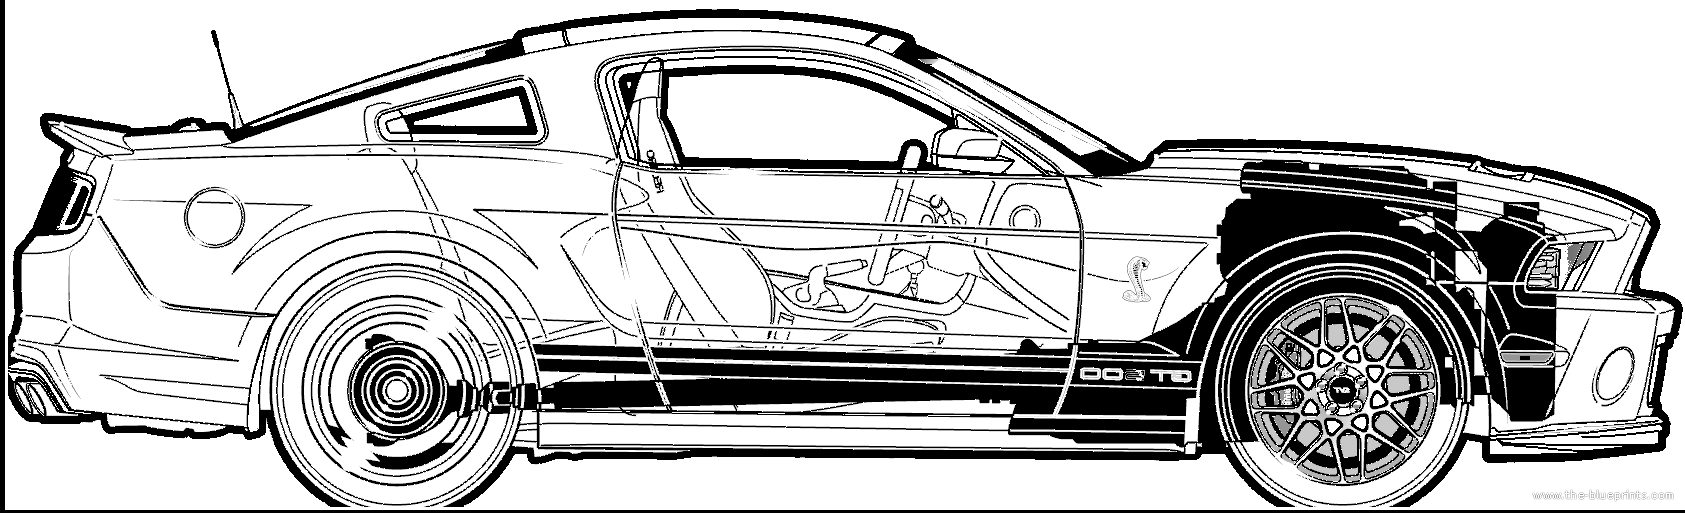 2005 Ford mustang blueprints #3